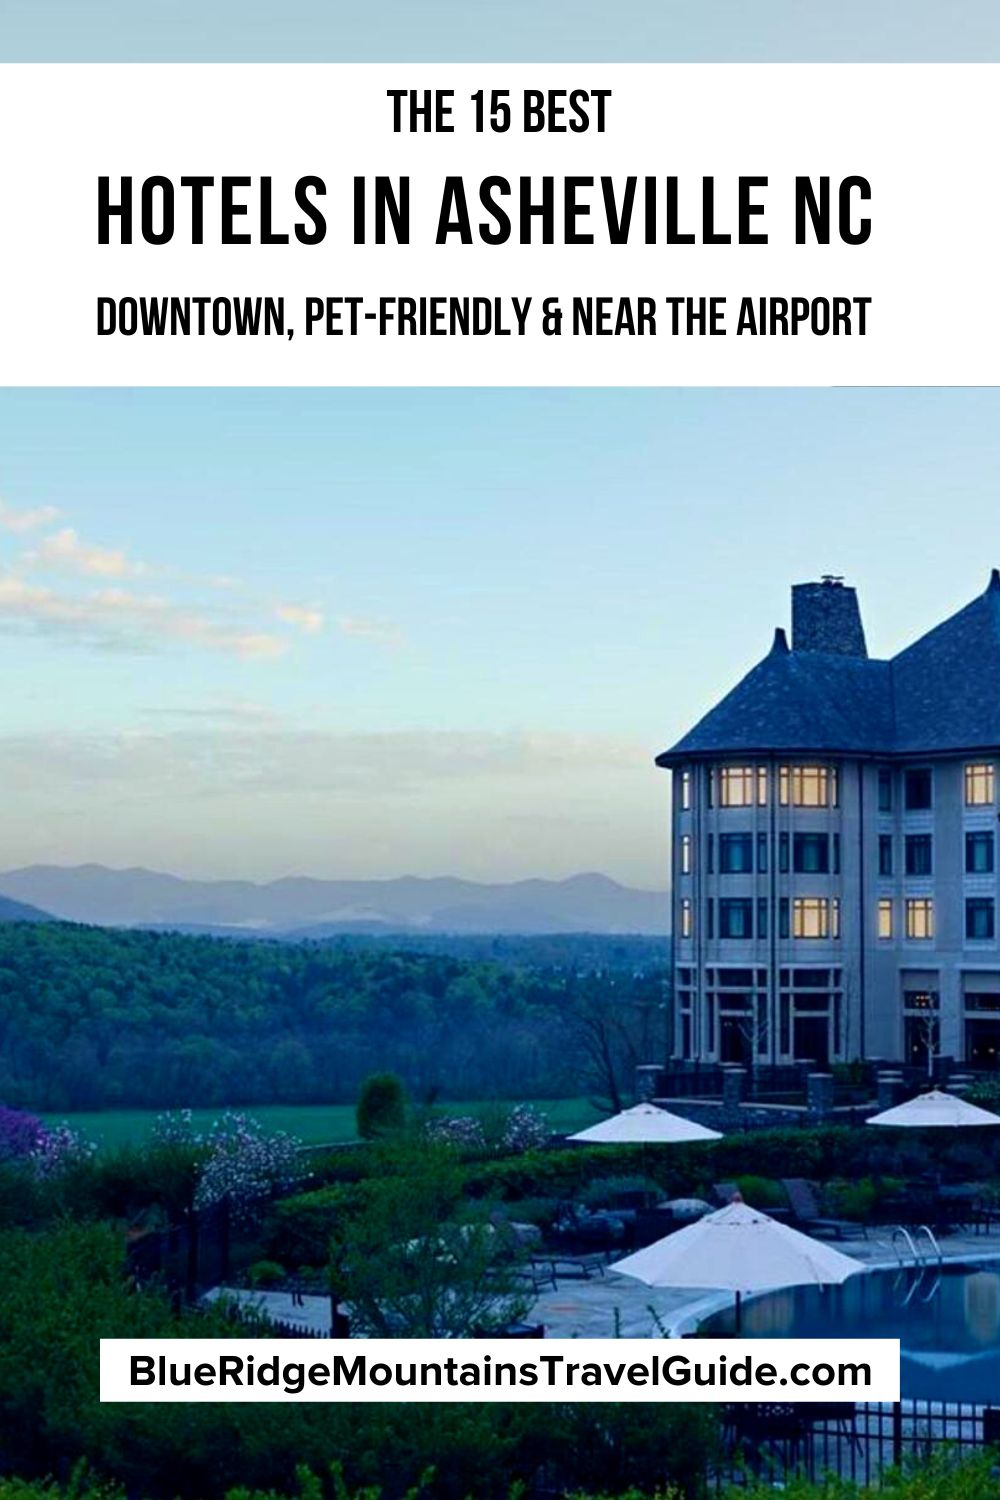 The Best Hotels in Asheville NC including Downtown Hotels, Pet-Friendly Hotels, & Hotels near the Asheville Airport with Shuttle Service. | asheville nc hotels | asheville hotels | hotels in asheville downtown | asheville north carolina hotels | best hotels in asheville north carolina | pet friendly hotels asheville nc | asheville nc pet-friendly hotels | hotels downtown asheville nc | luxury hotels asheville nc | asheville hotels downtown | asheville nc hotels downtown |